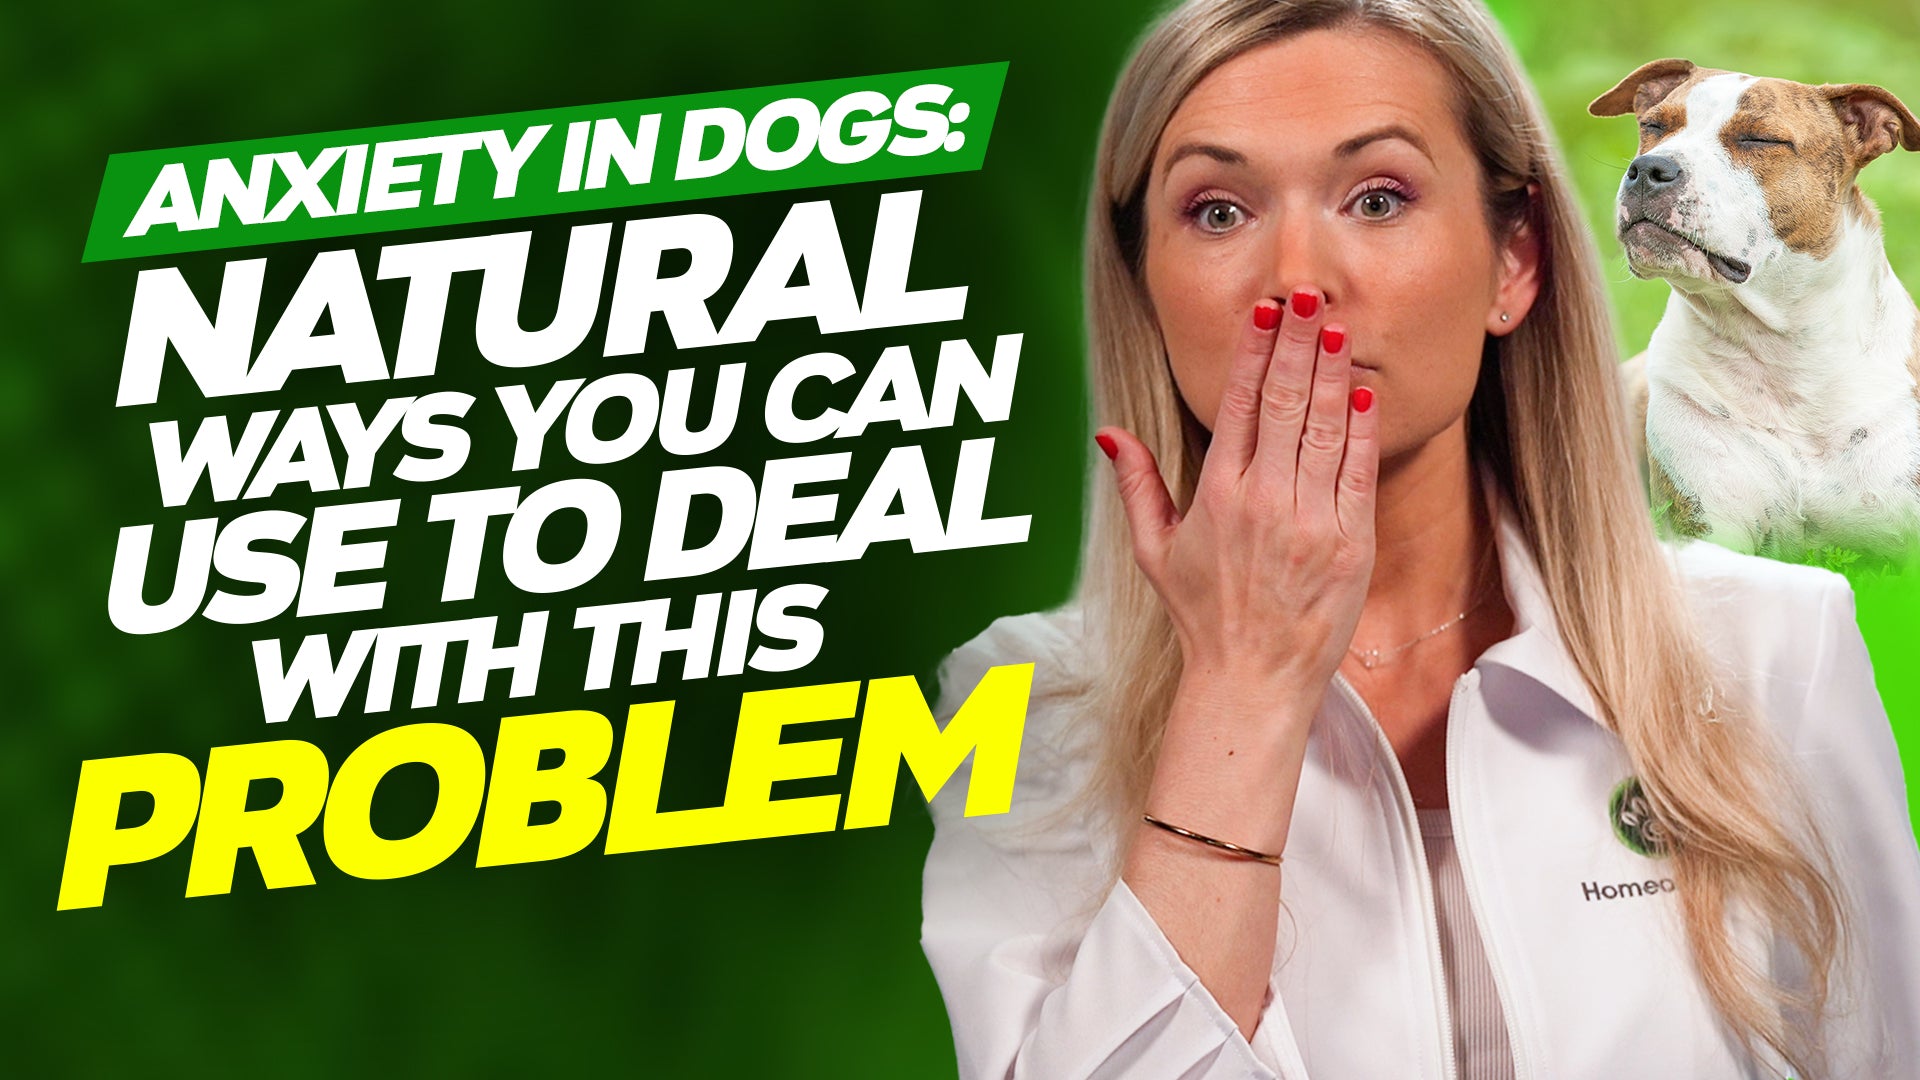 How to Calm an Anxious Dog the NATURAL Way